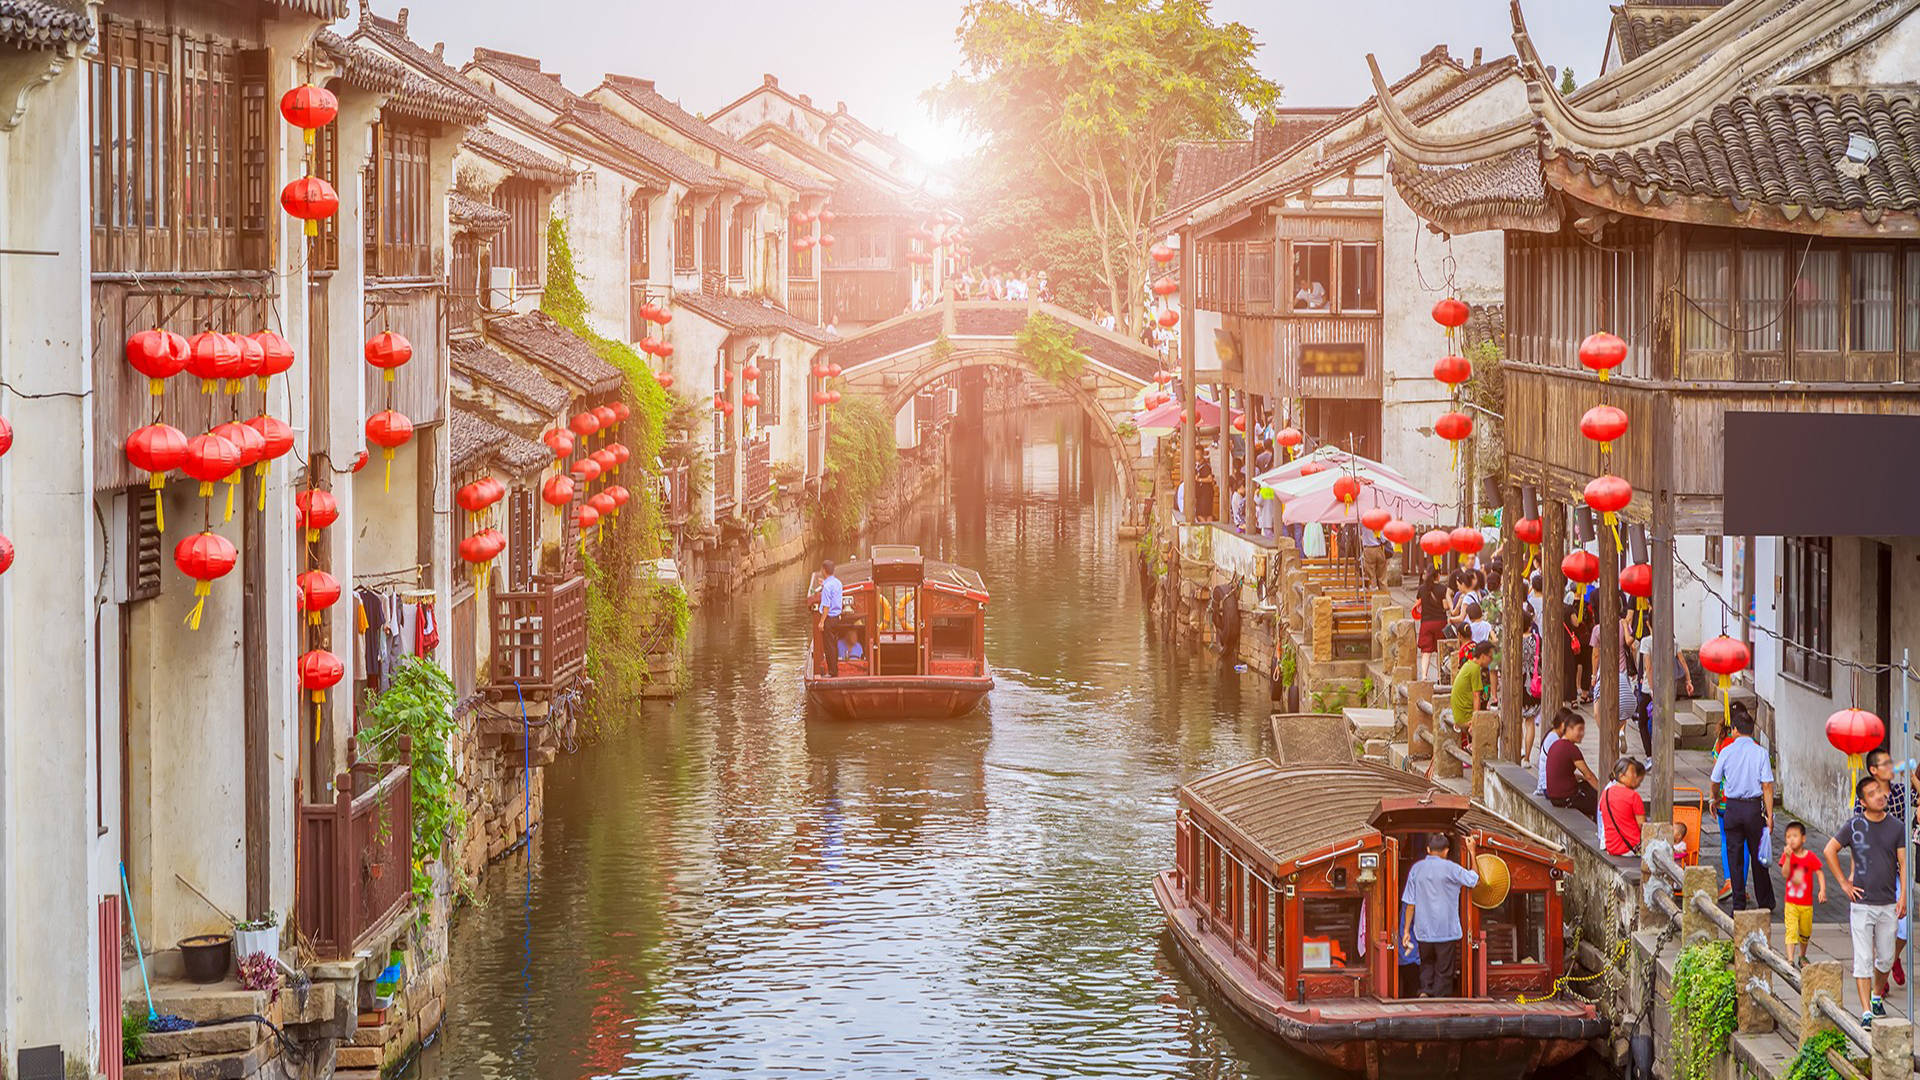 Picturesque Suzhou Canal At Sunset Wallpaper